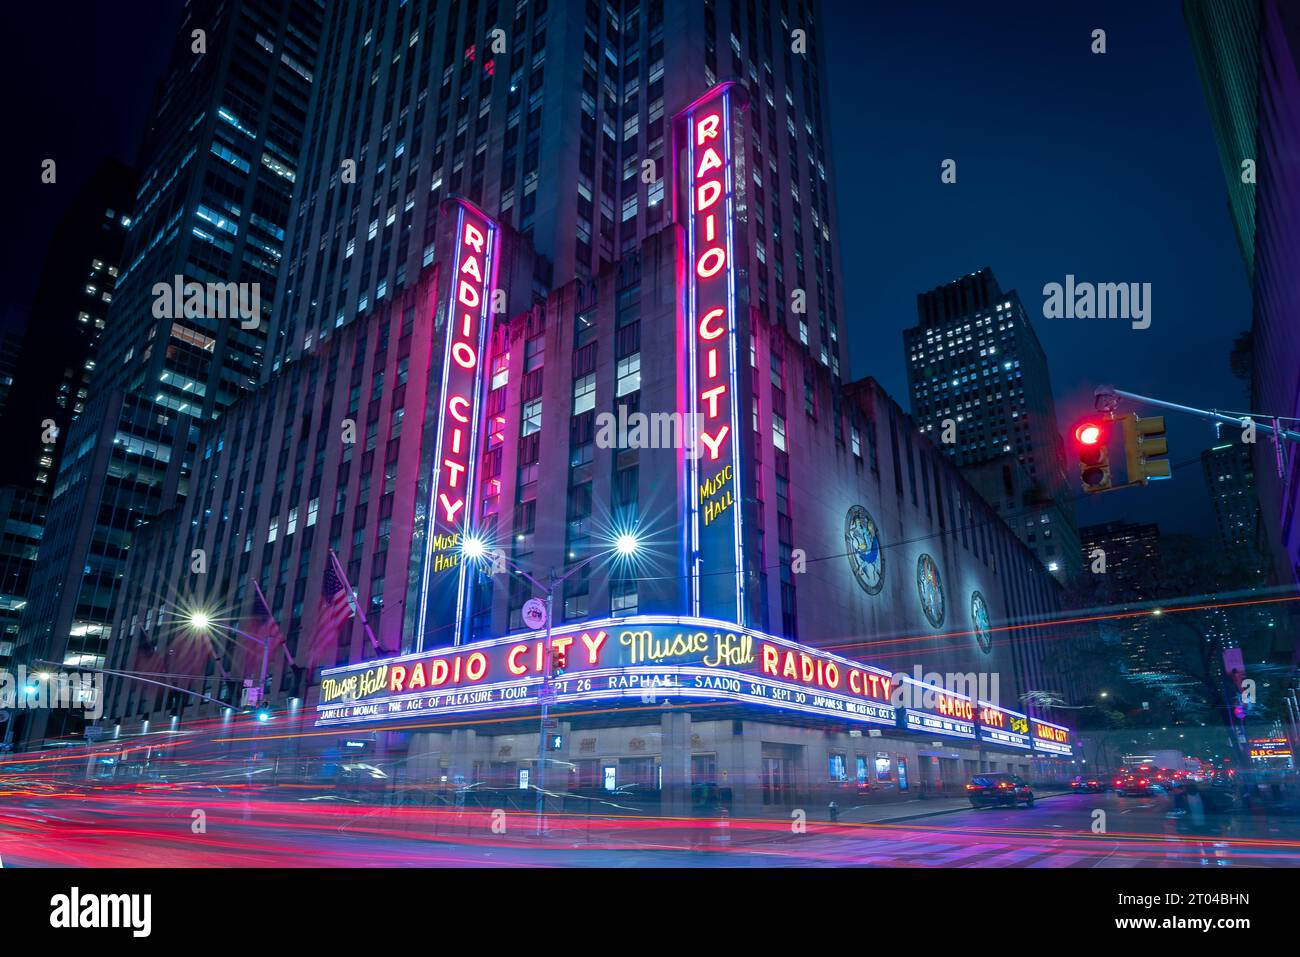 09.19.23. New York city, USA. illuminated Radio city music hall in Midtown of NYC near by Rockefeller center. Famous theater in Manhattan. Stock Photo